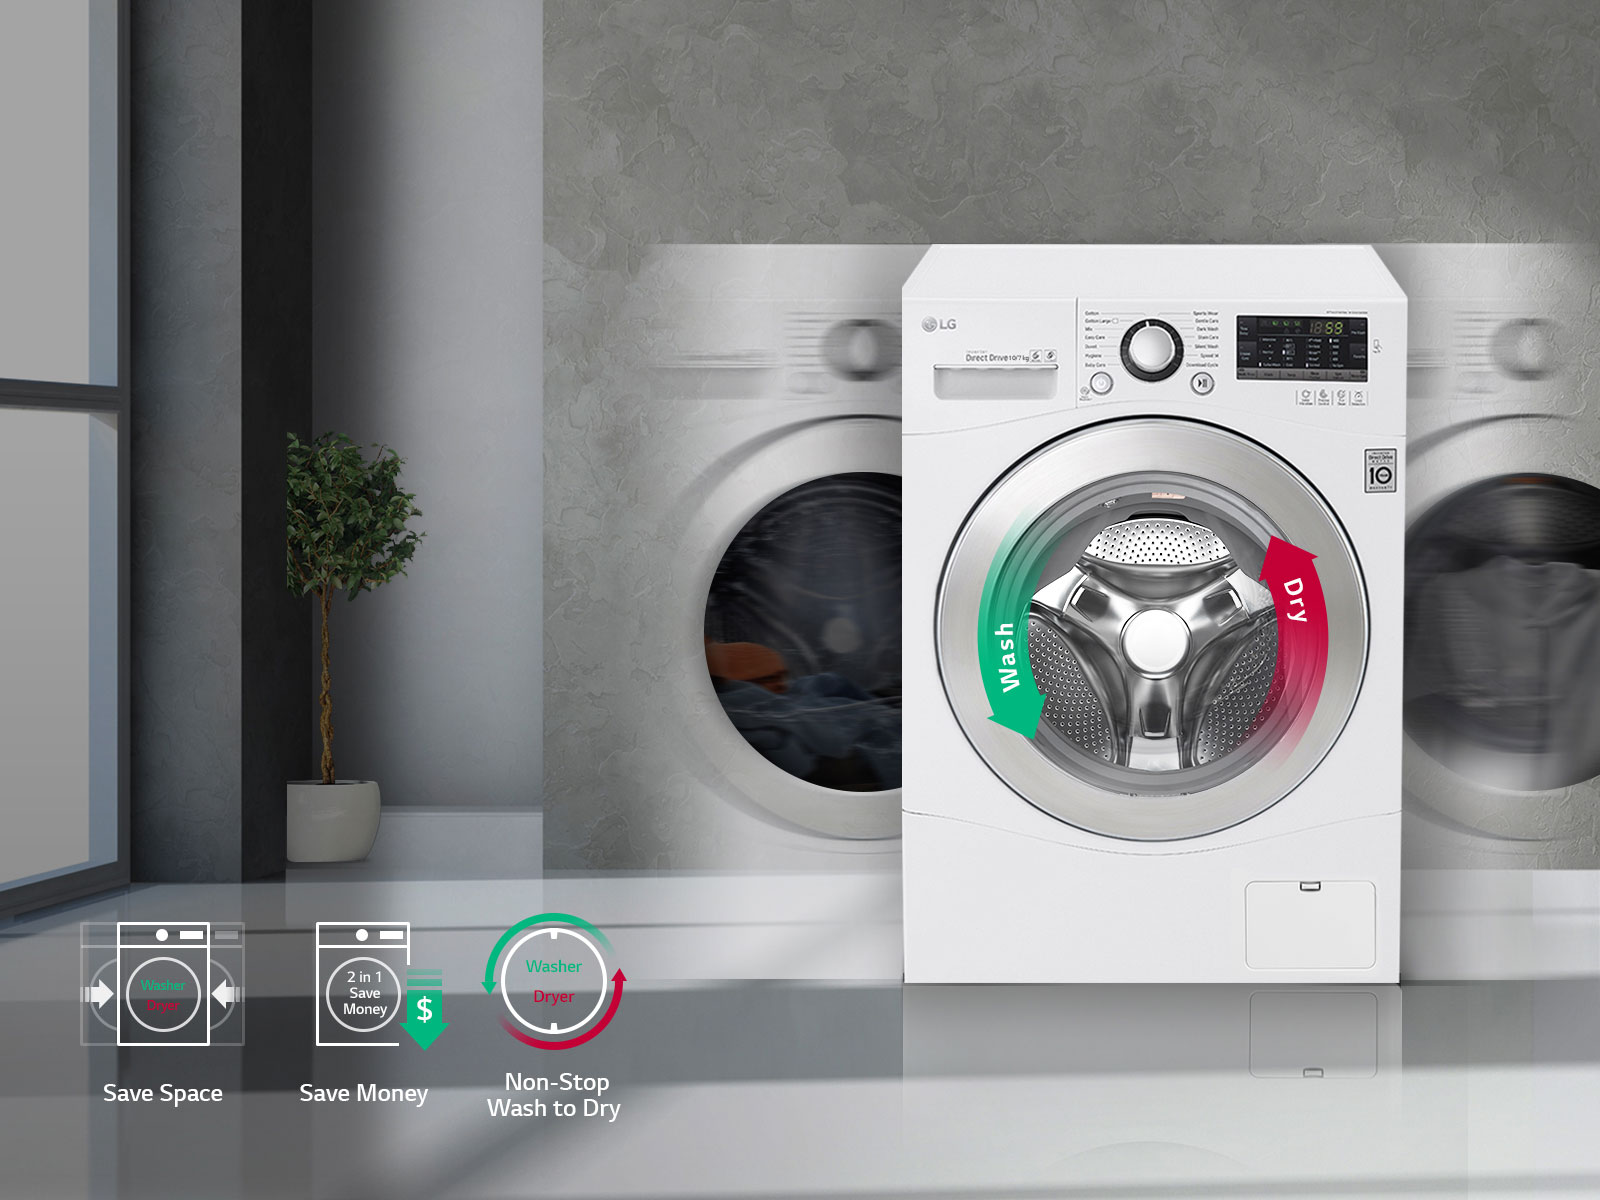 Washer And Dryer In One - Lg Washing Machine - HD Wallpaper 